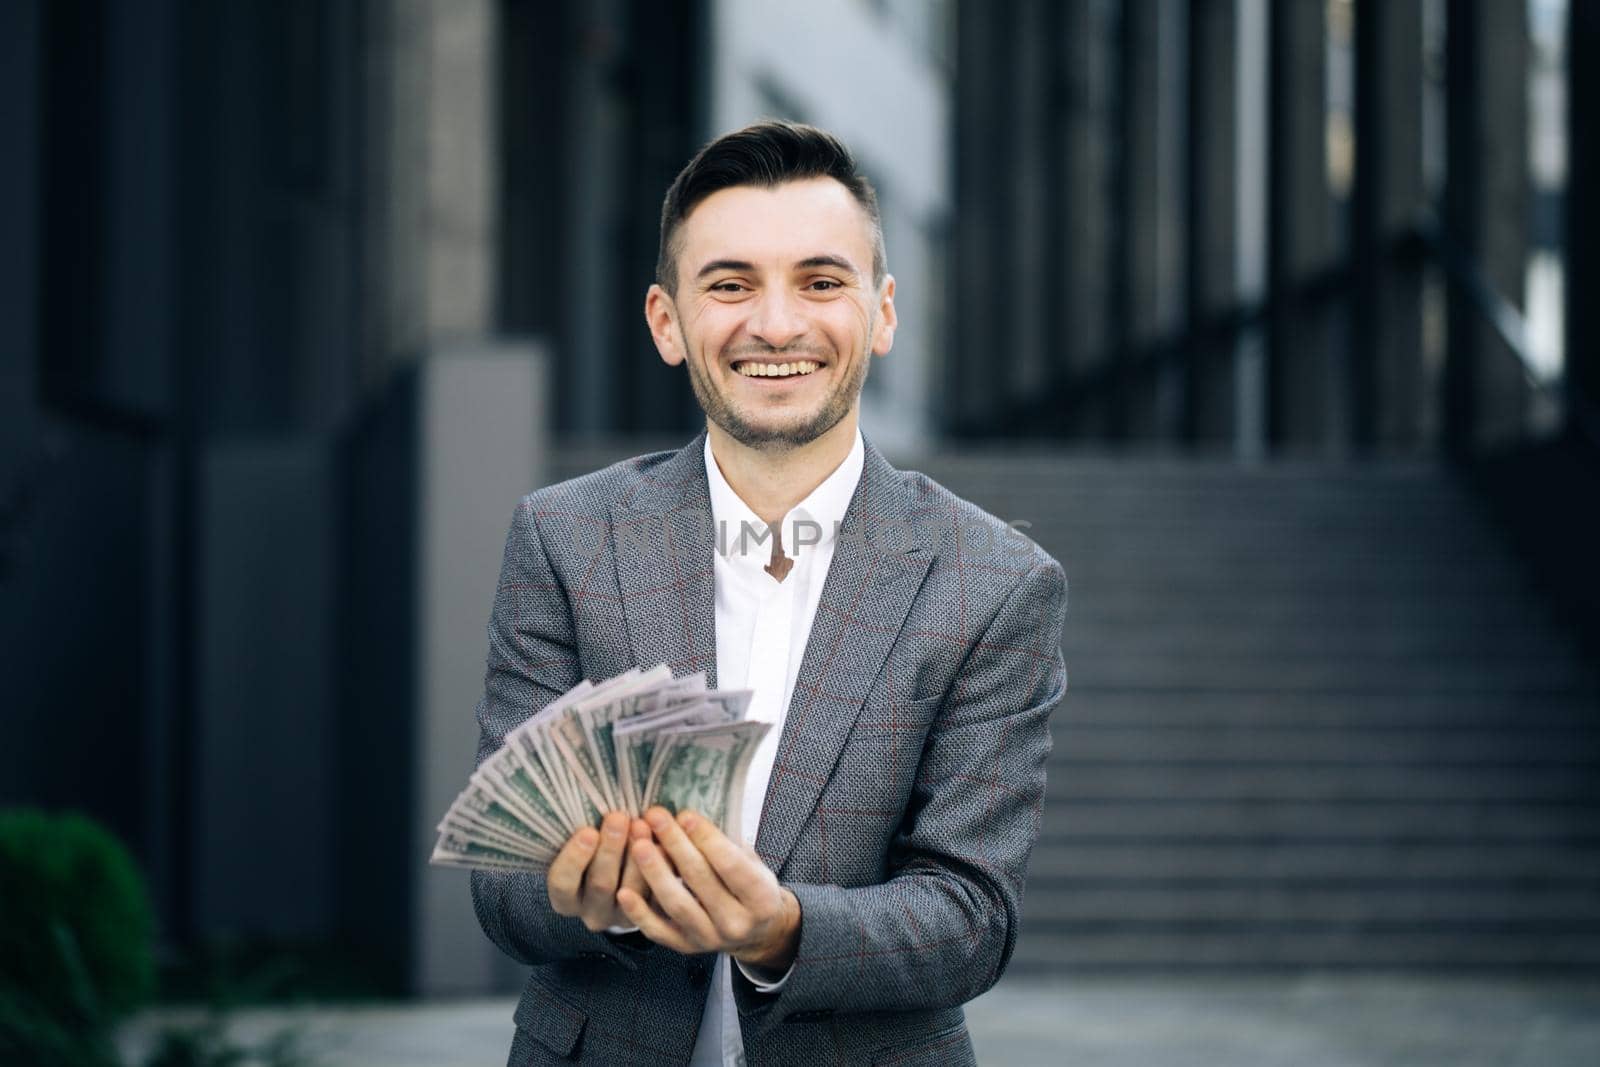 Amazed happy excited businessman with money - U.S. currency dollars banknotes. Man shows money and celebrating success, victory while looking to camera. Outdoors.